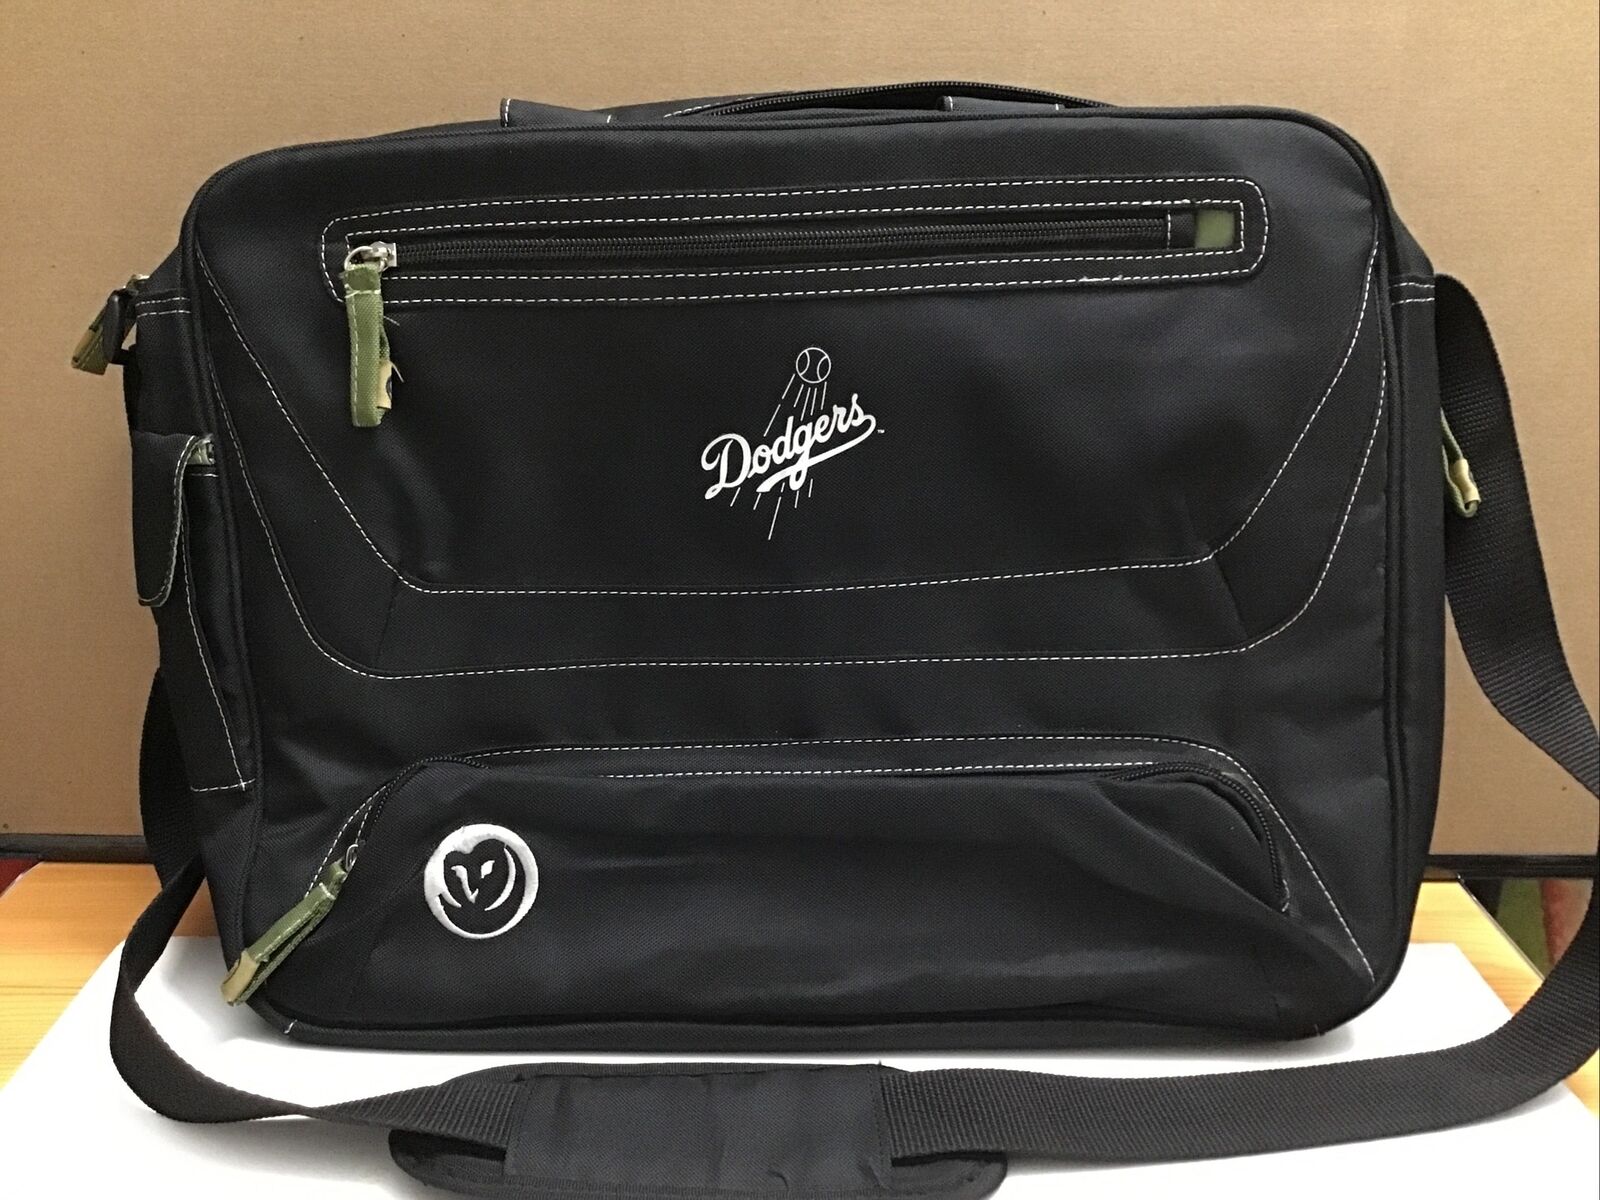 LOS ANGELES DODGERS Owl CompuCase Deluxe Computer Laptop Bag Travel TEAM ISSUED